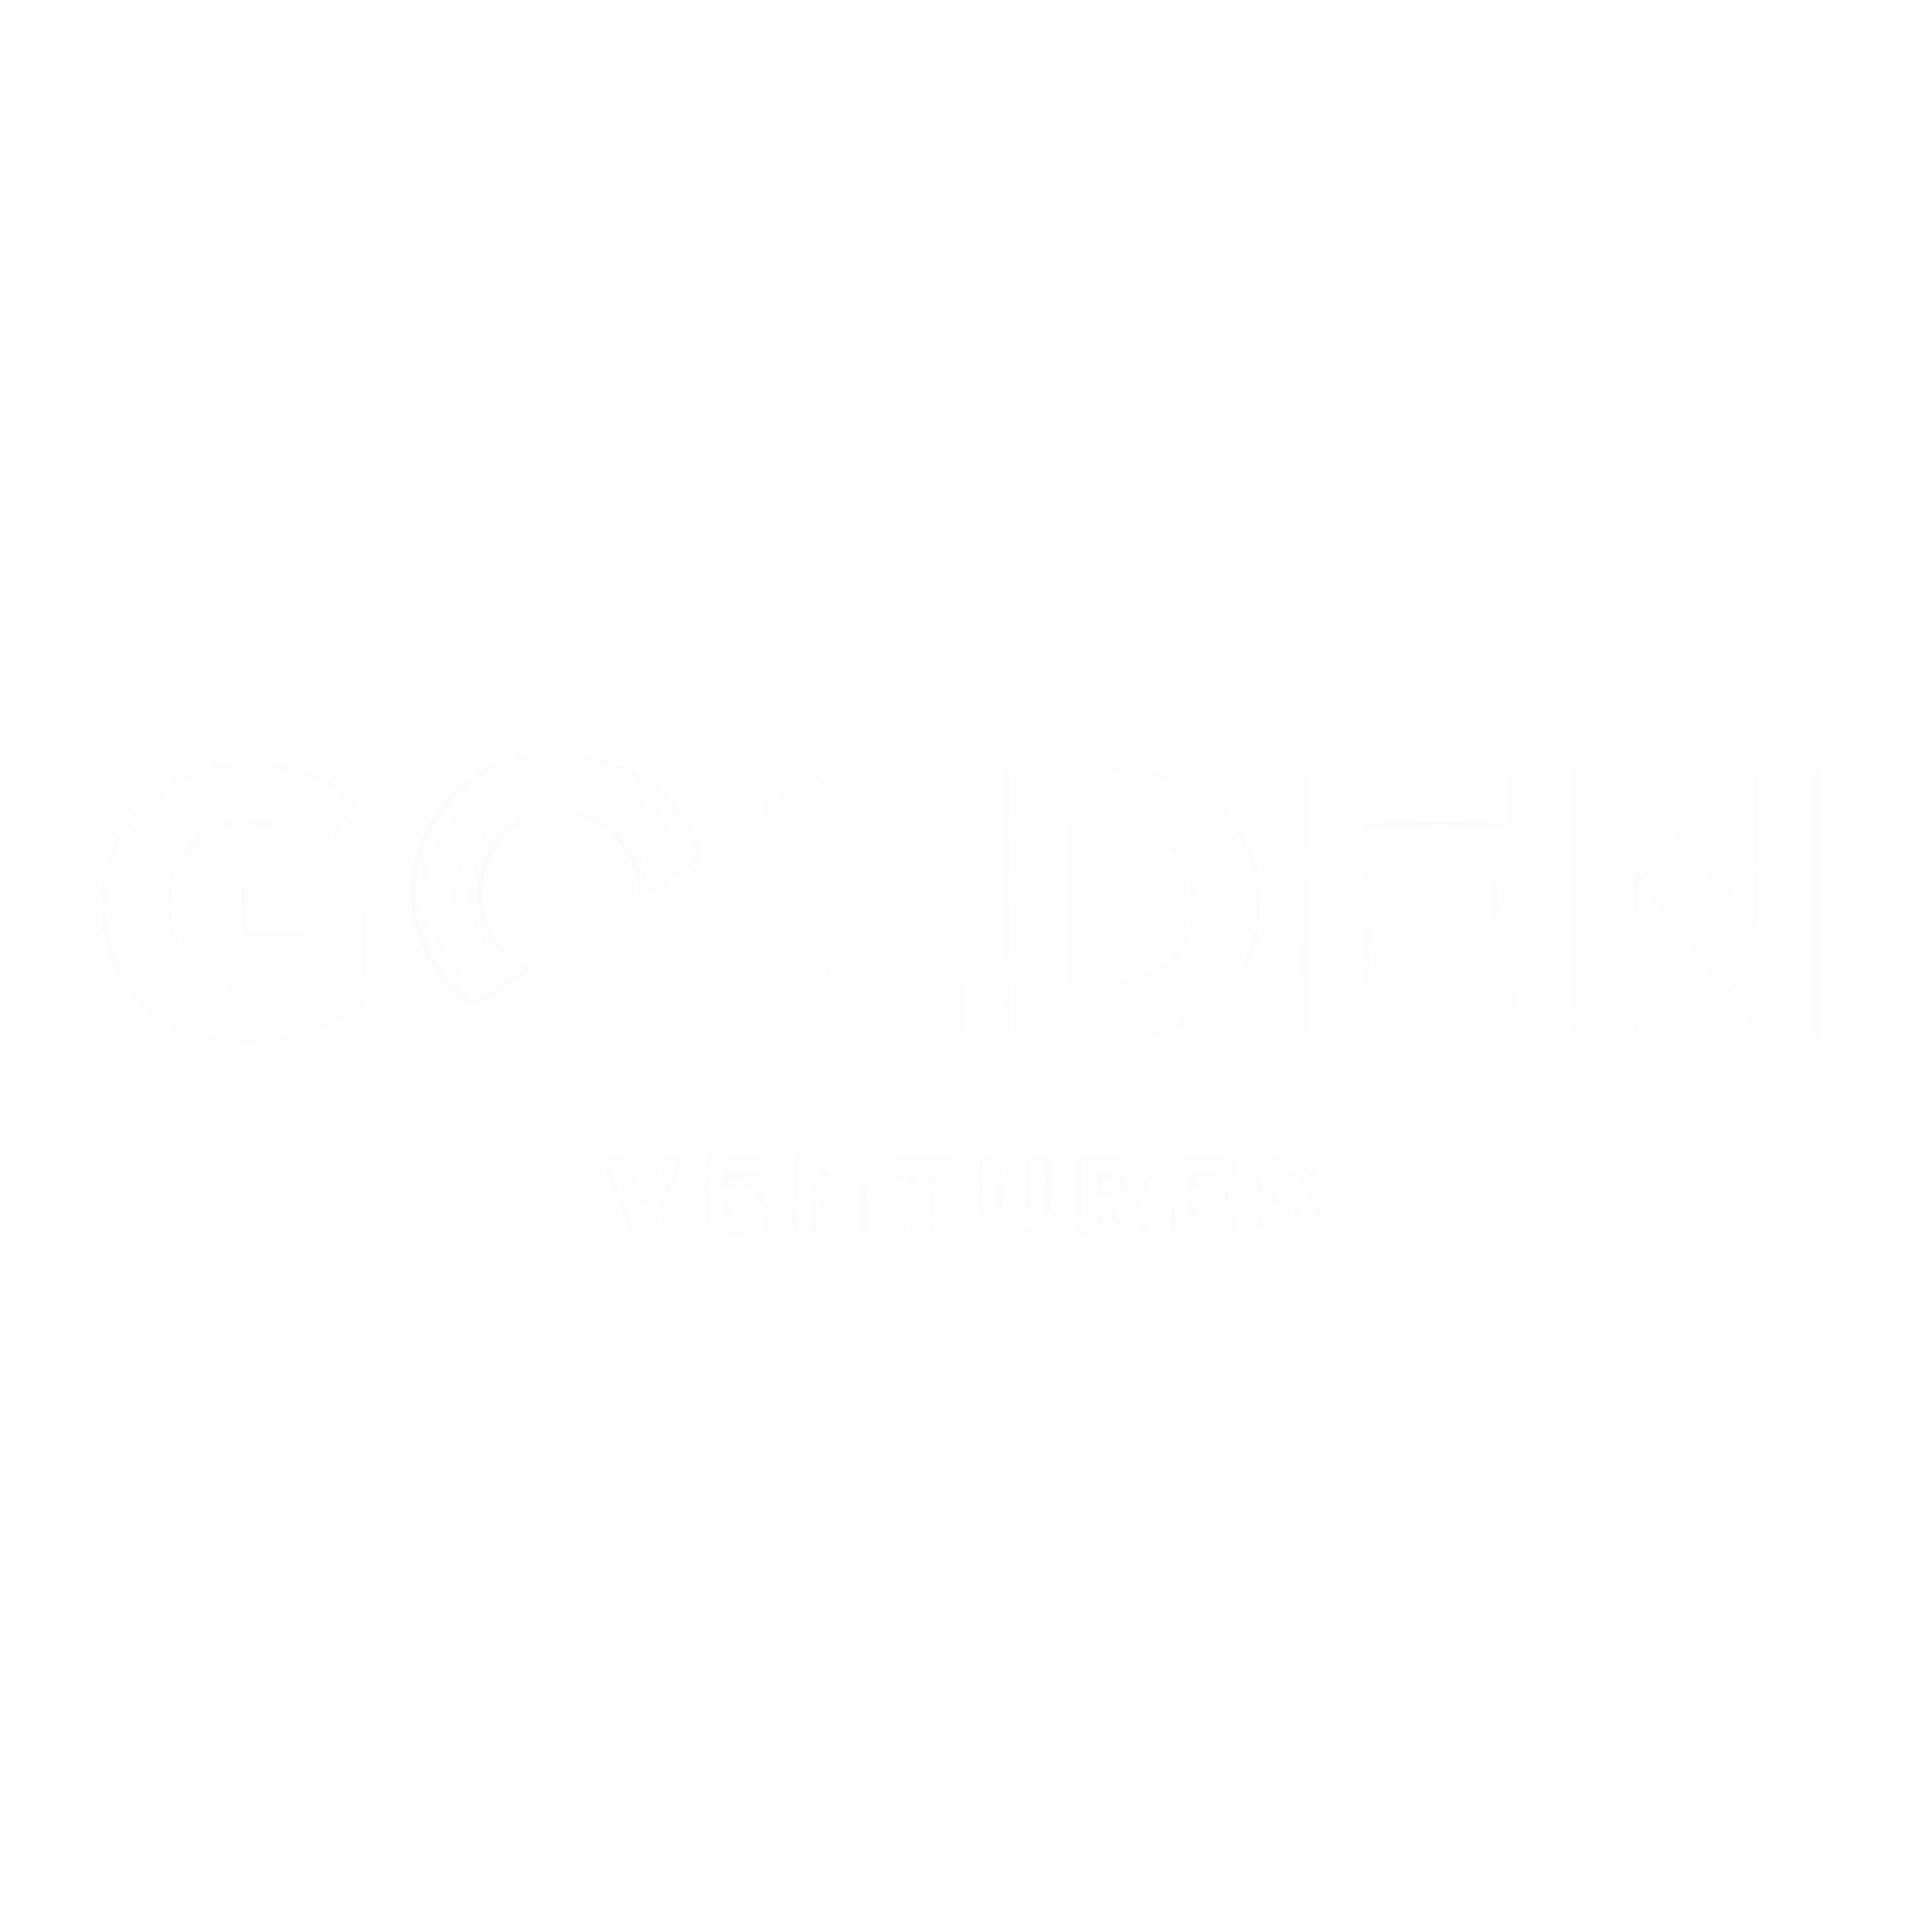 Emerge Golden Ventures capital VC venture capital firm investments VR virtual reality AR augmented reality